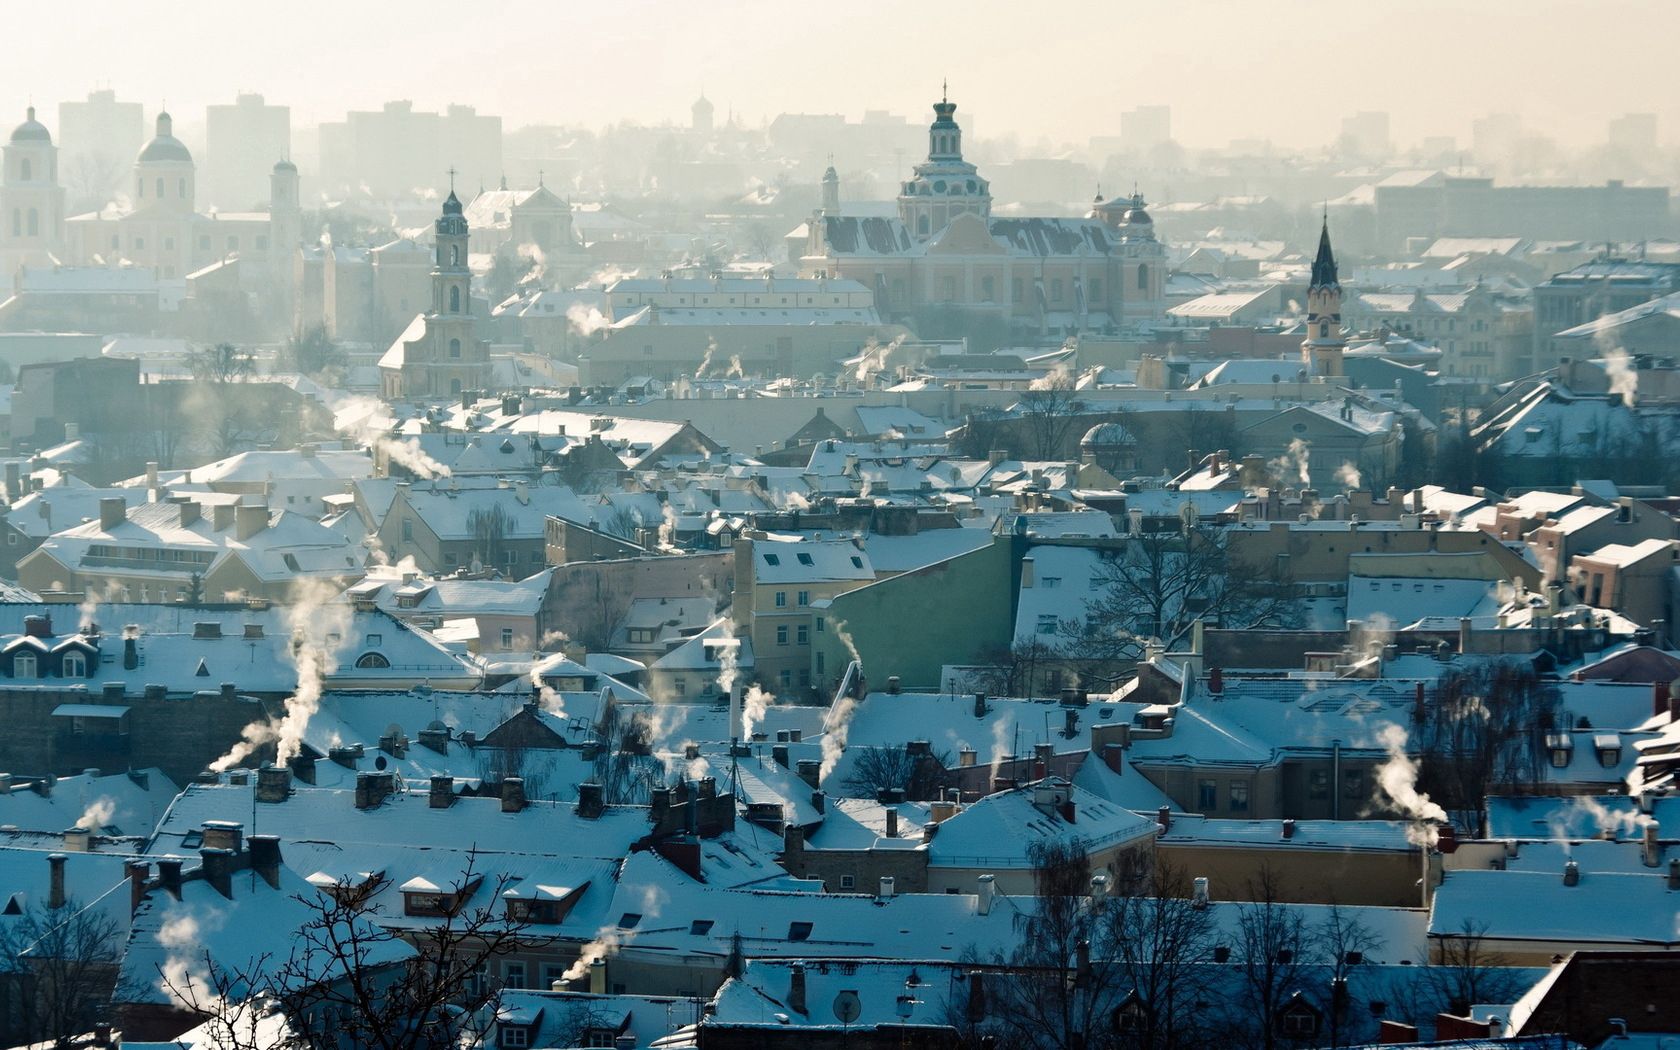 cities, smoke, lithuania, panorama, urban landscape, cityscape, roof, roofs, vilnius